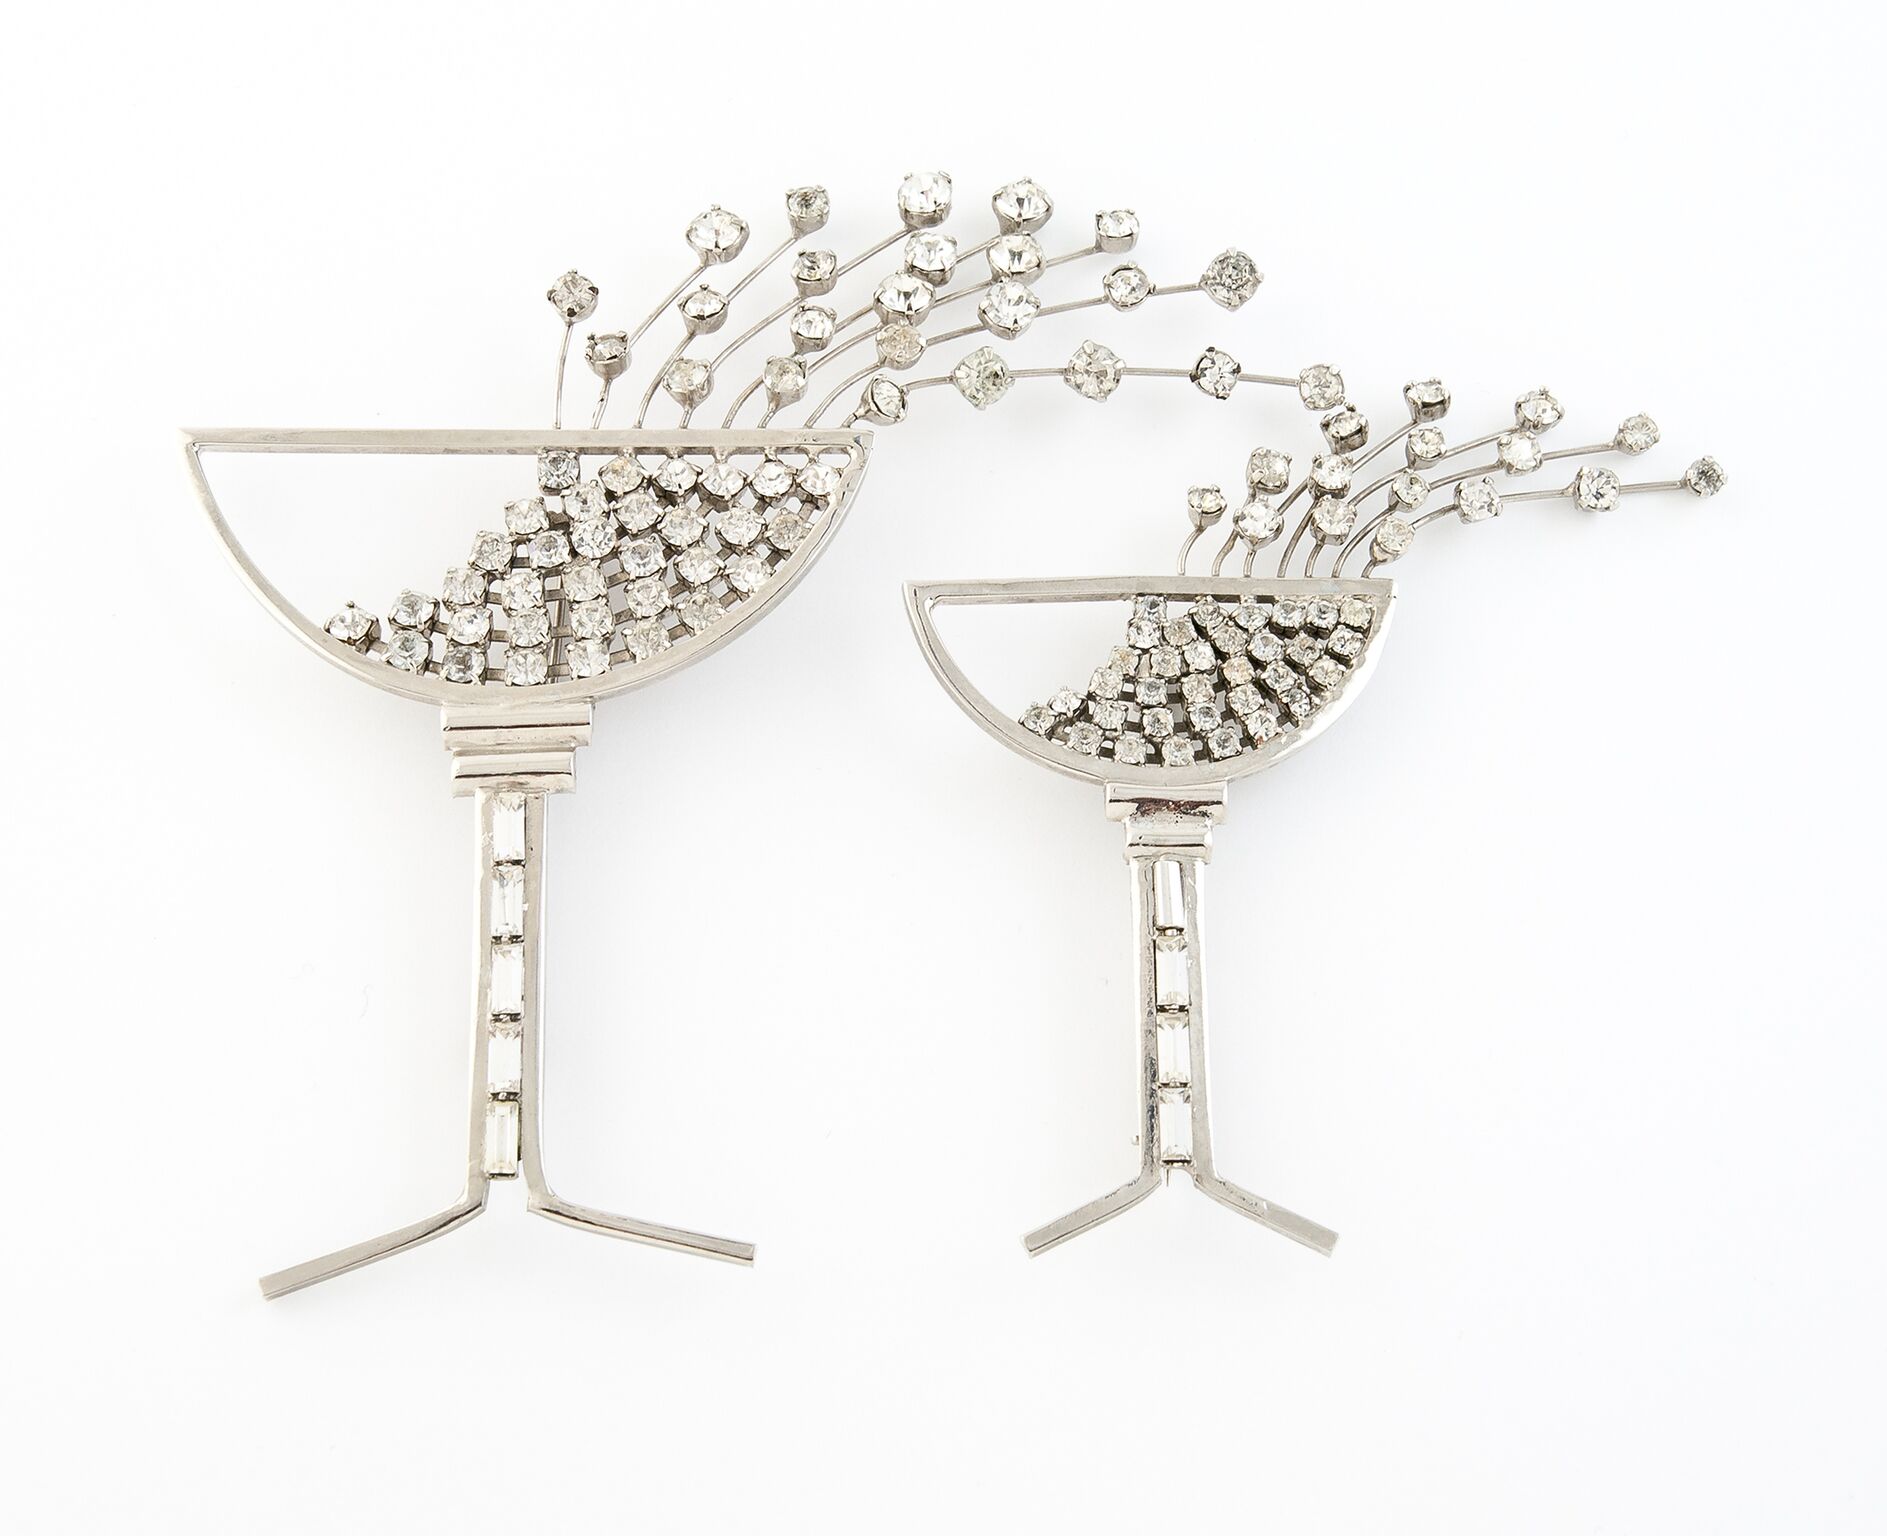 Pair of champagnes glasses brooches c1985, Ugo Correani, Italy